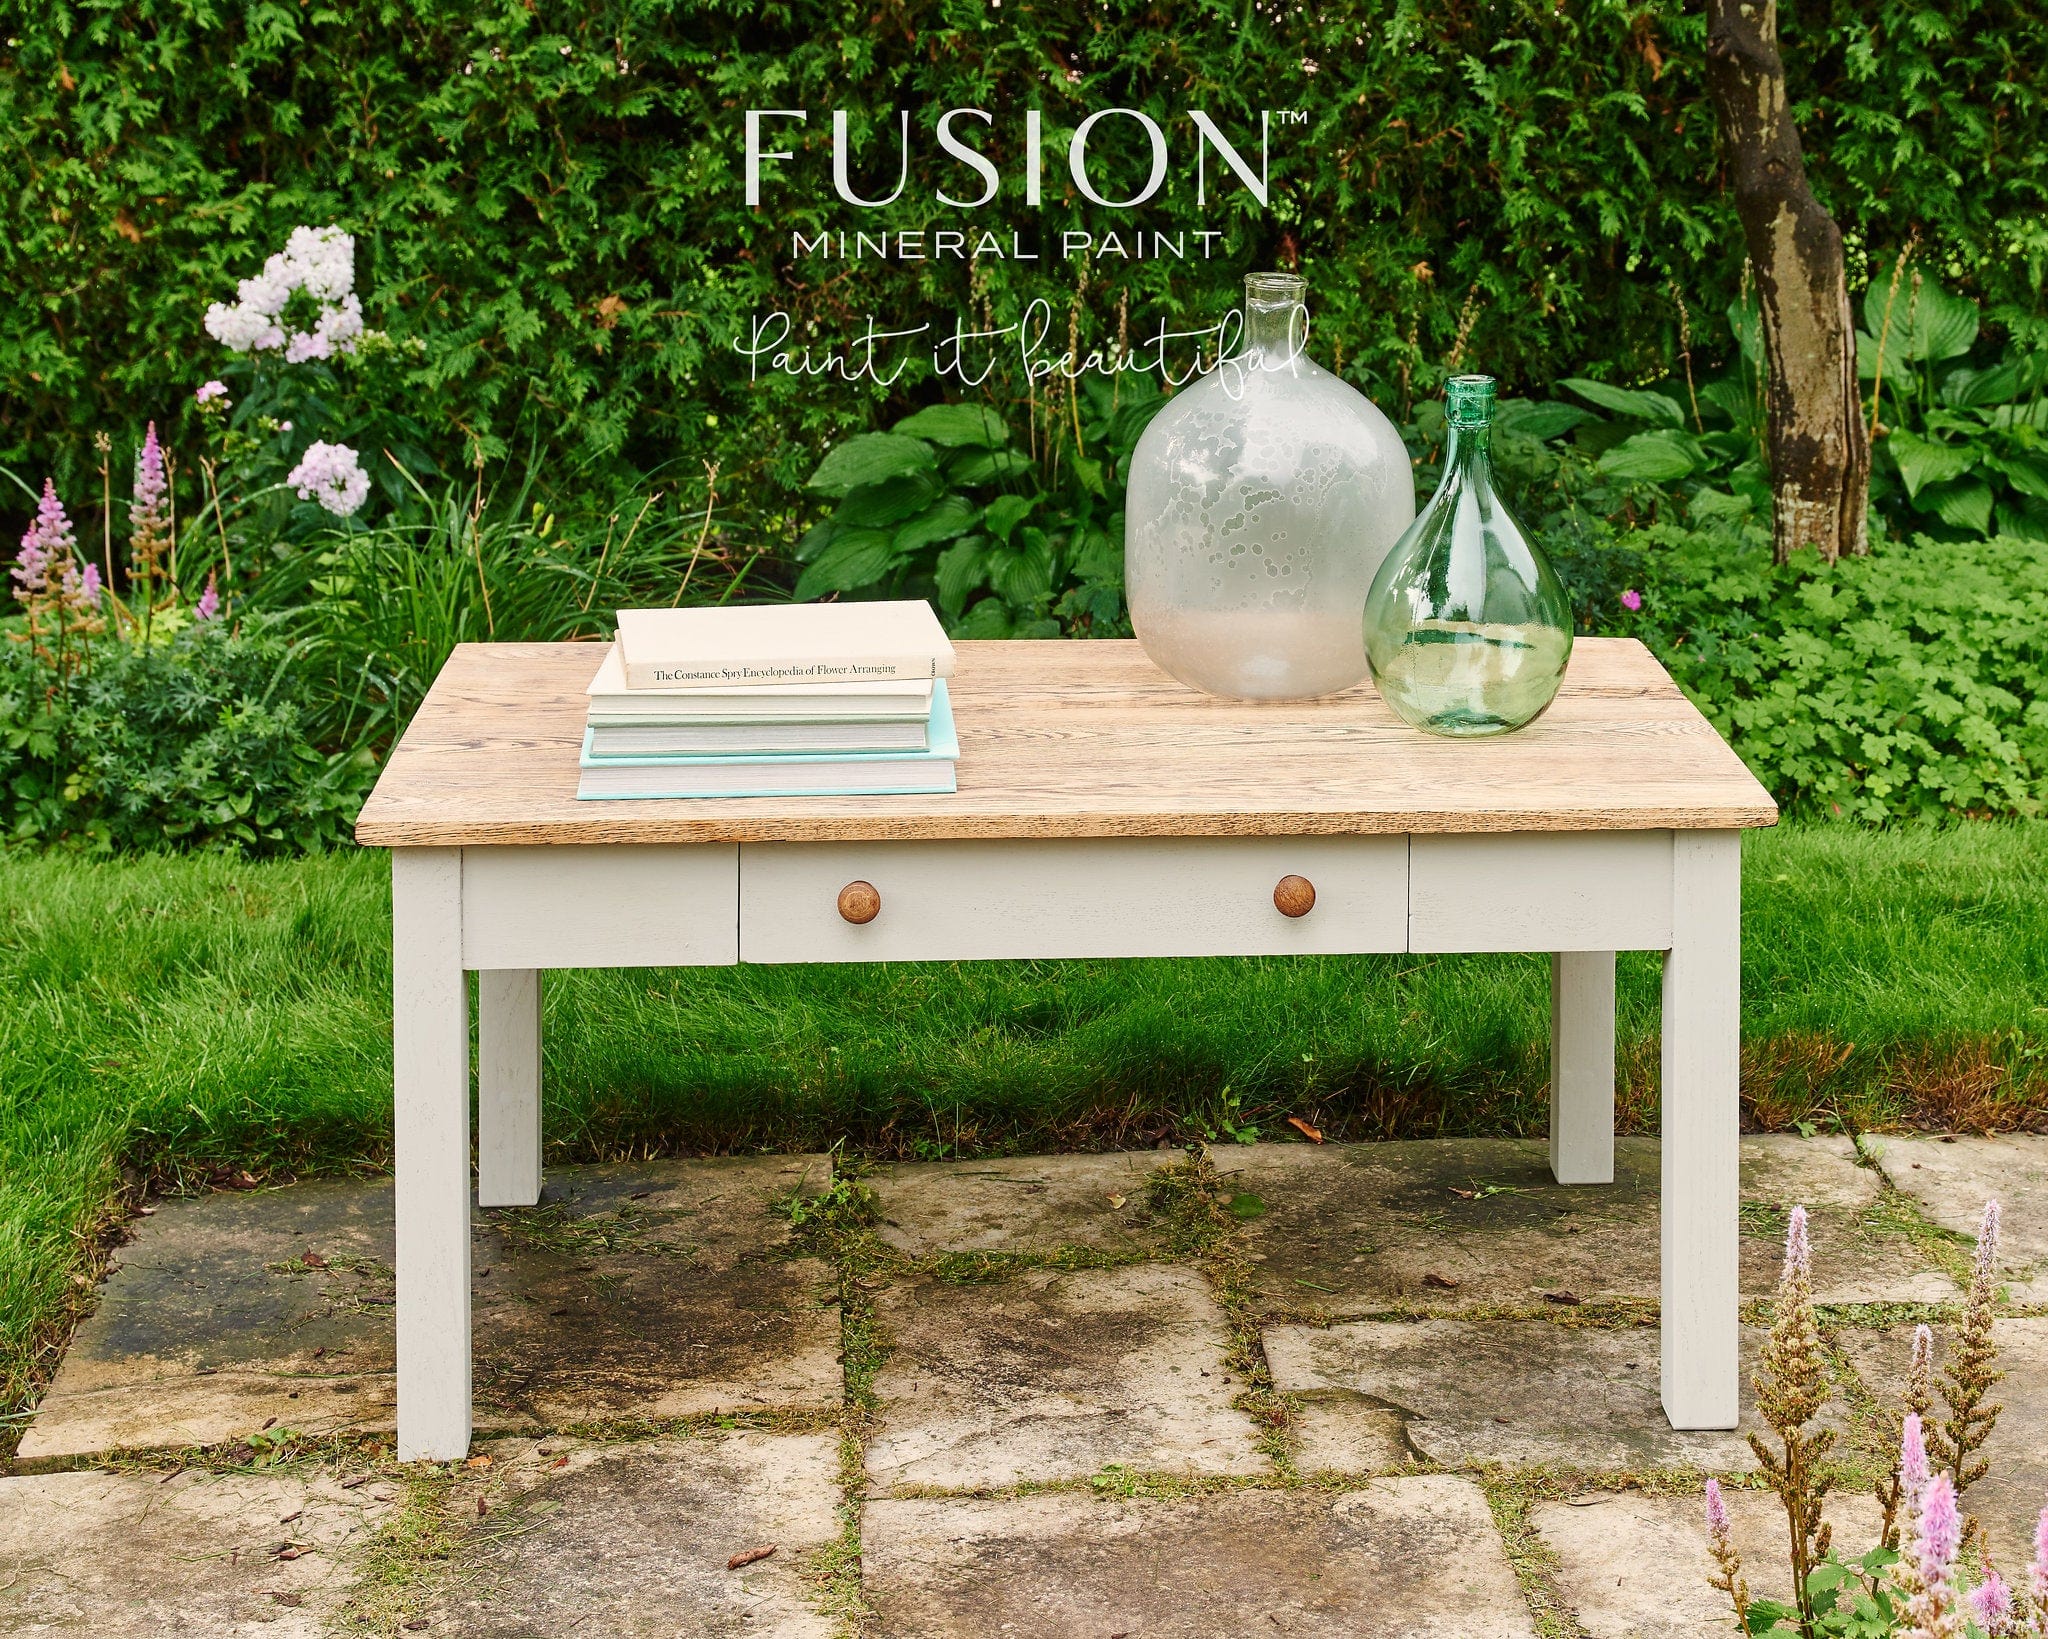 Fusion Fusion Mineral Paint Choose one Fusion Mineral Paint - Putty